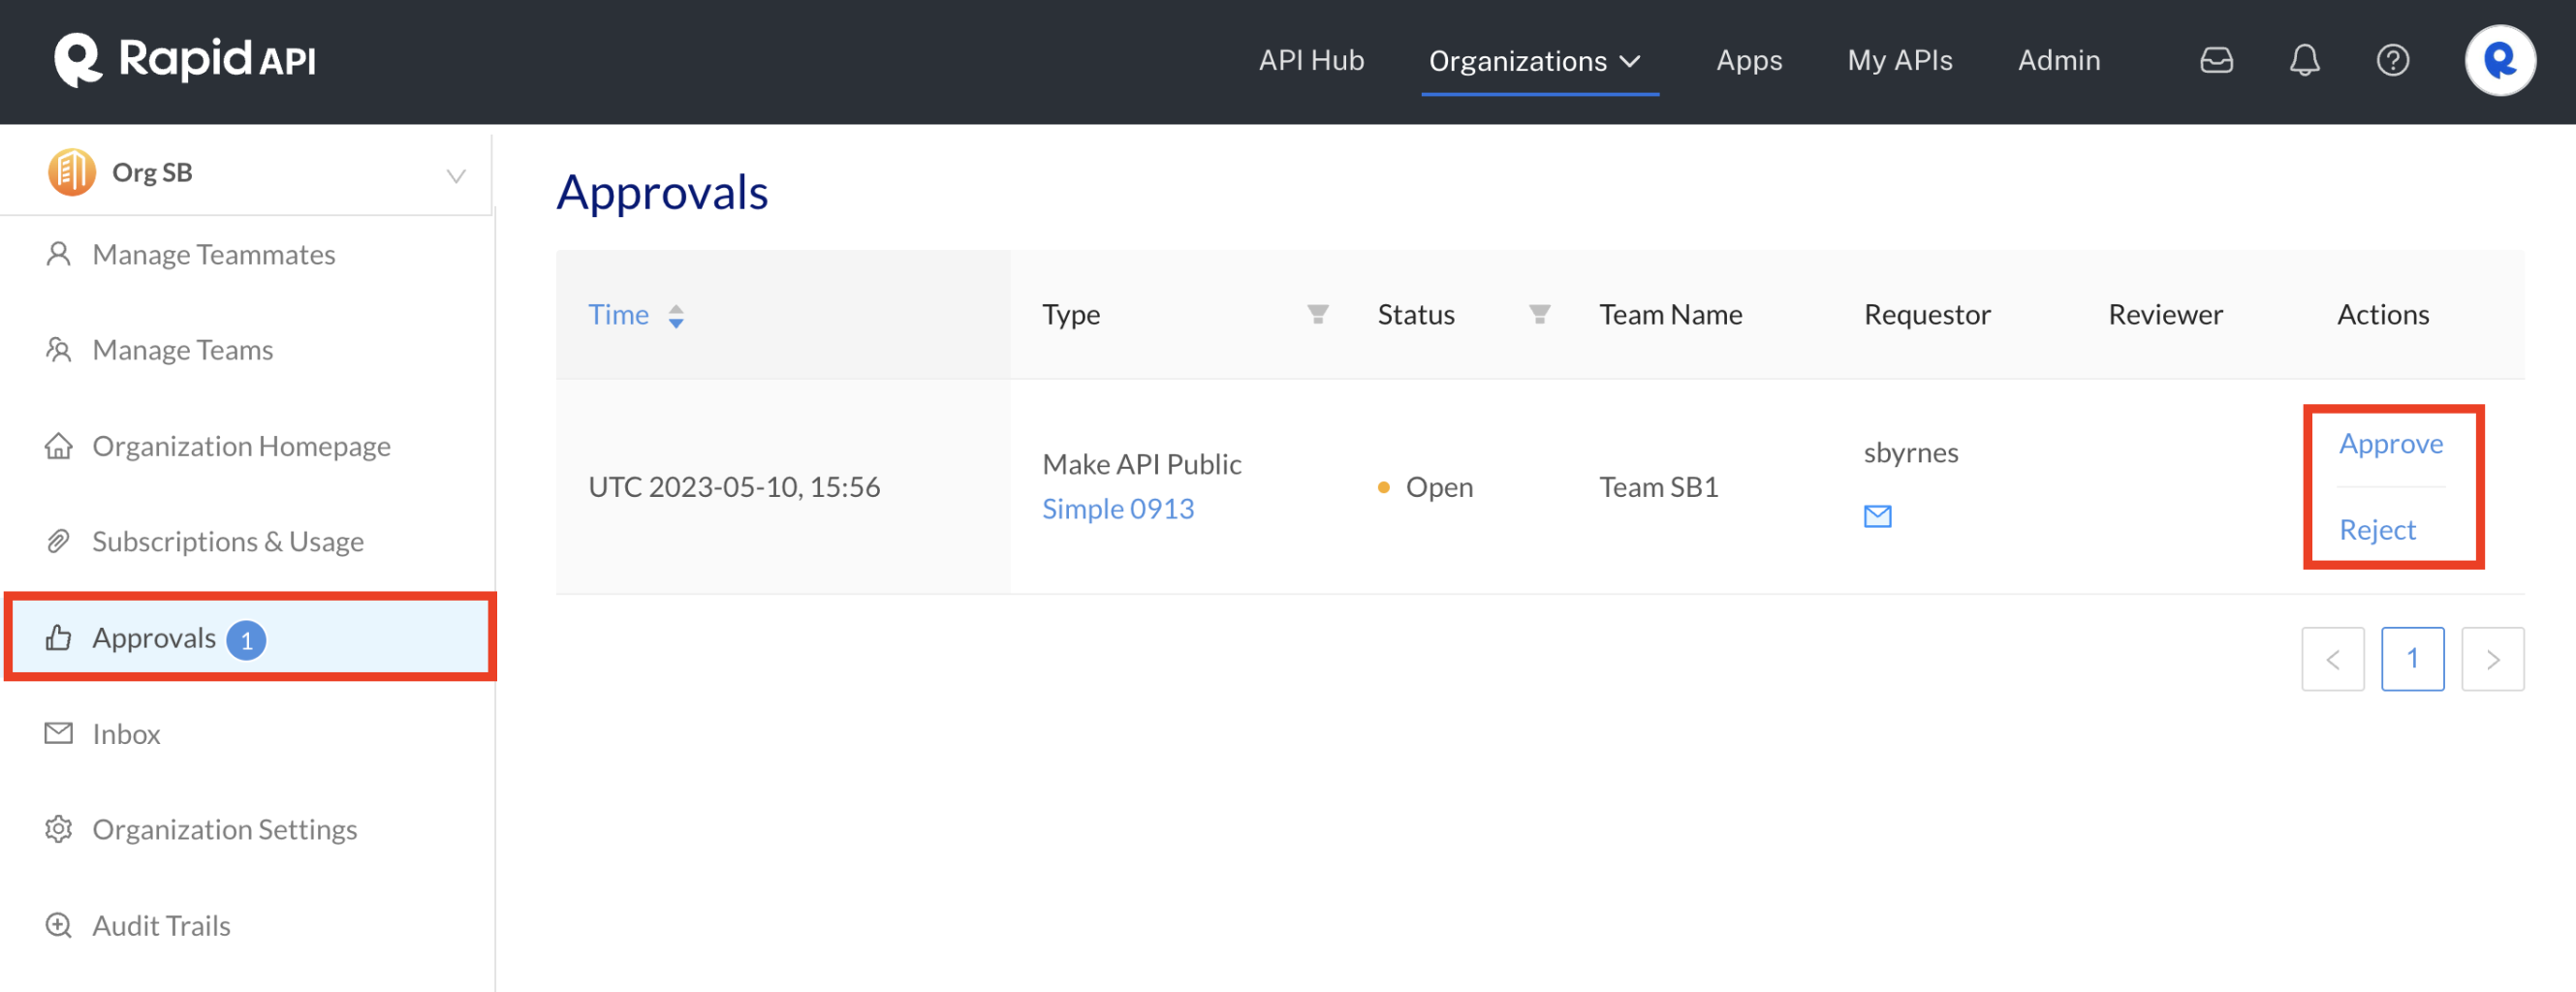 Organization Dashboard: Approving or rejecting a team's request to make an API public.